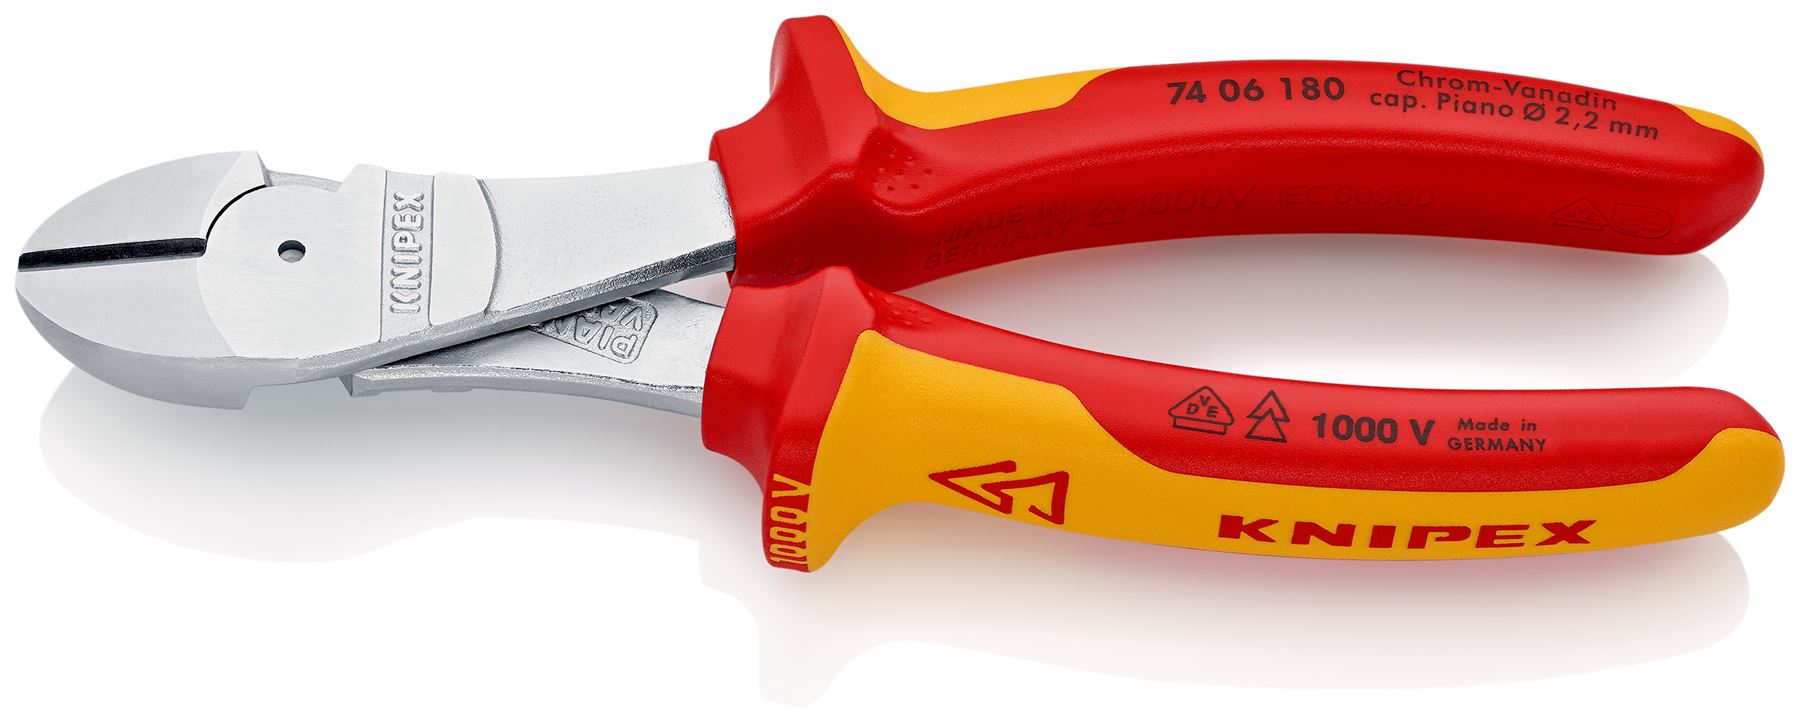 Knipex High Leverage Diagonal Side Cutting Pliers 180mm VDE Insulated 74 06 180